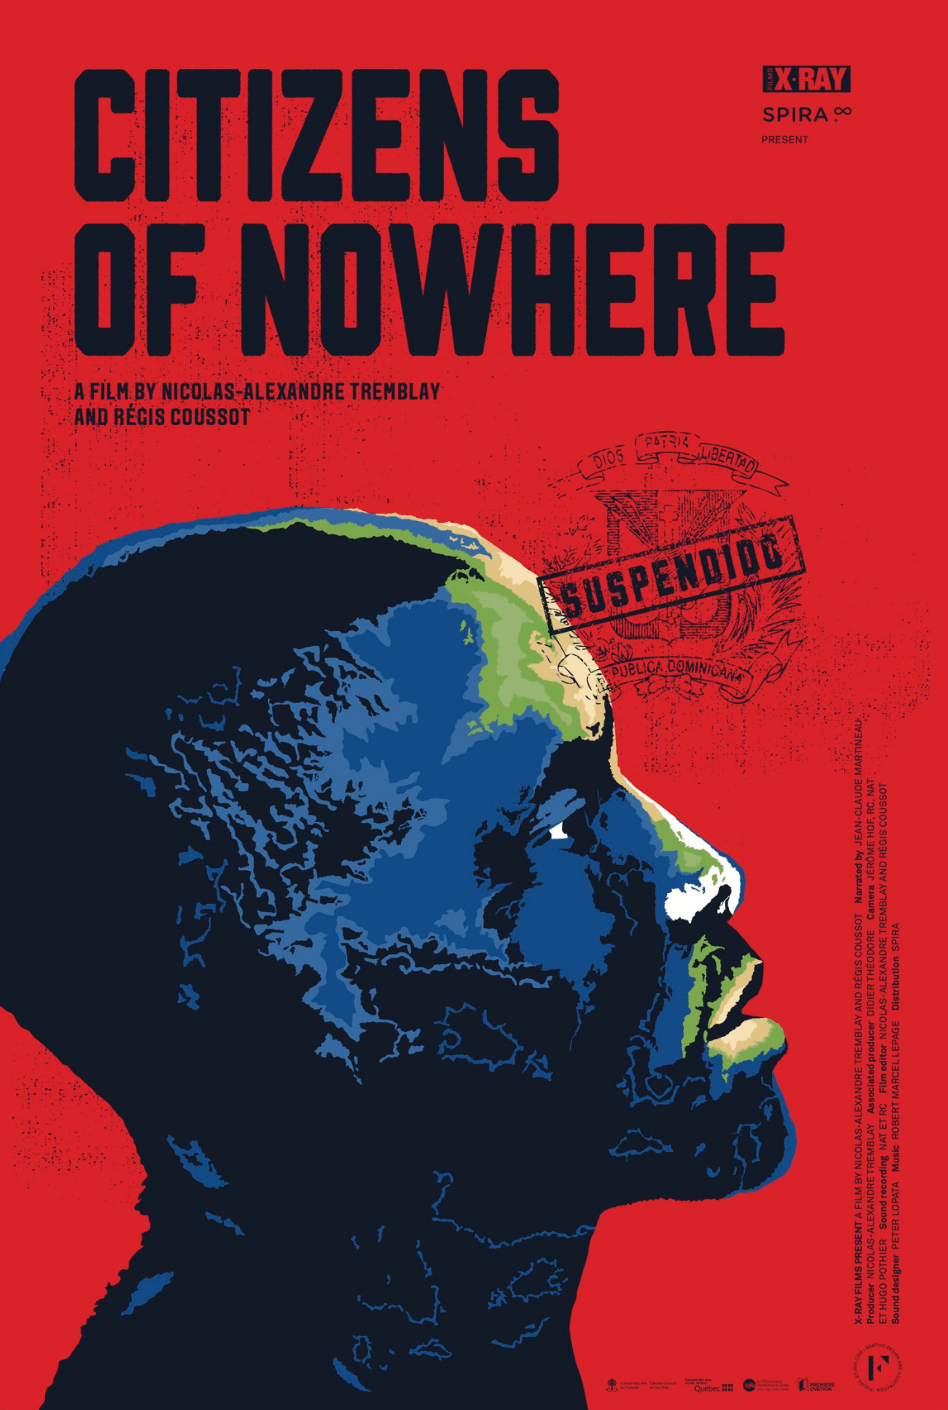 images/bottin_films/9b95f8922ff7d881361d5c406776ab5b-Citizens-of-nowhere-eng.png#joomlaImage://local-images/bottin_films/9b95f8922ff7d881361d5c406776ab5b-Citizens-of-nowhere-eng.png?width=948&height=1410